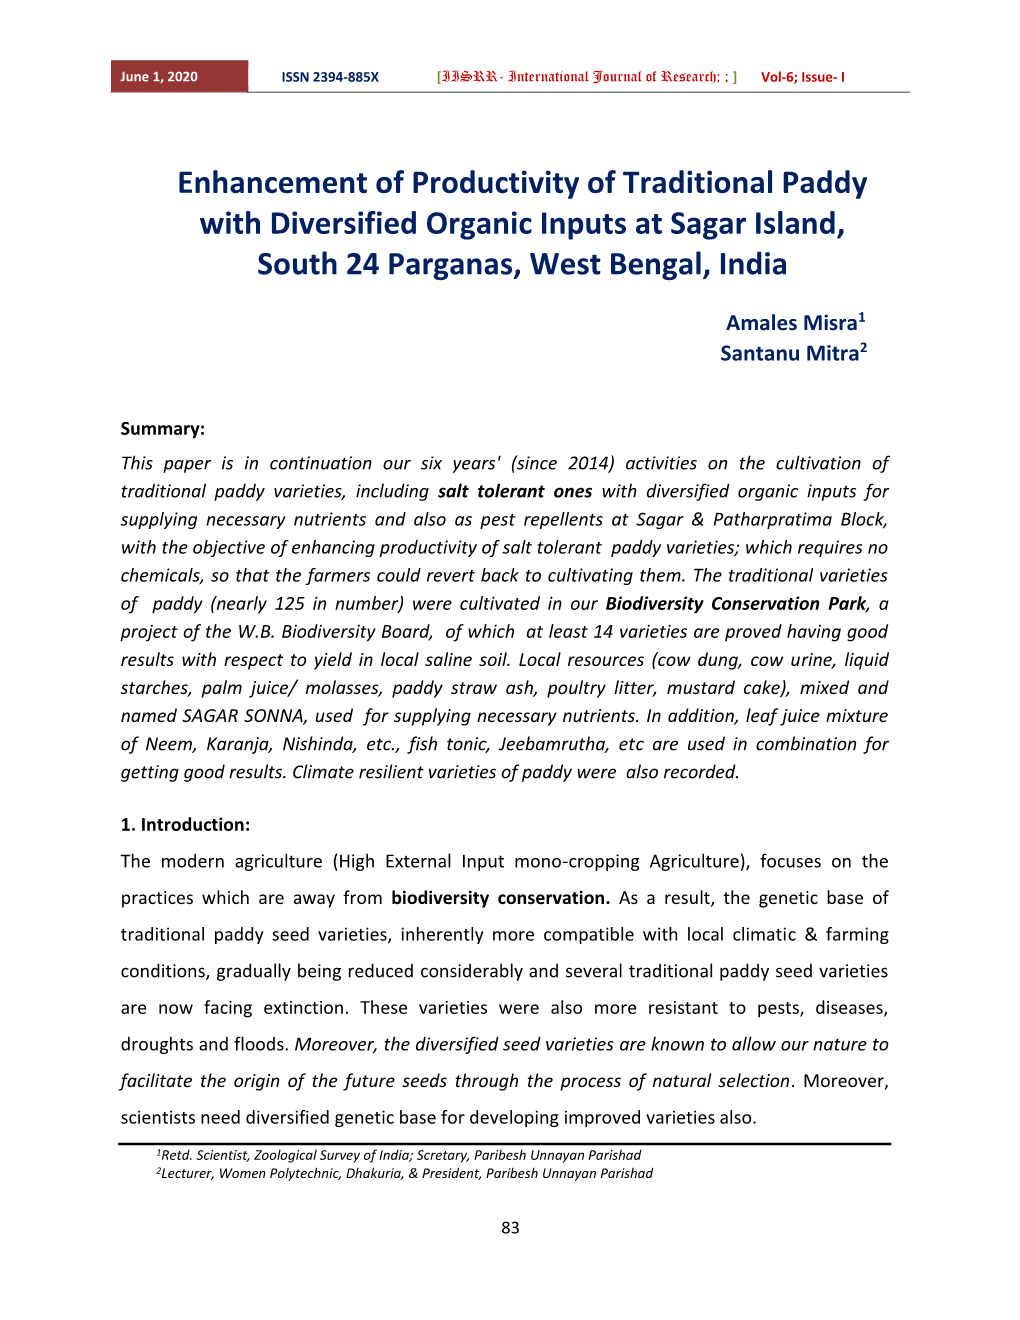 Enhancement of Productivity of Traditional Paddy with Diversified Organic Inputs at Sagar Island, South 24 Parganas, West Bengal, India